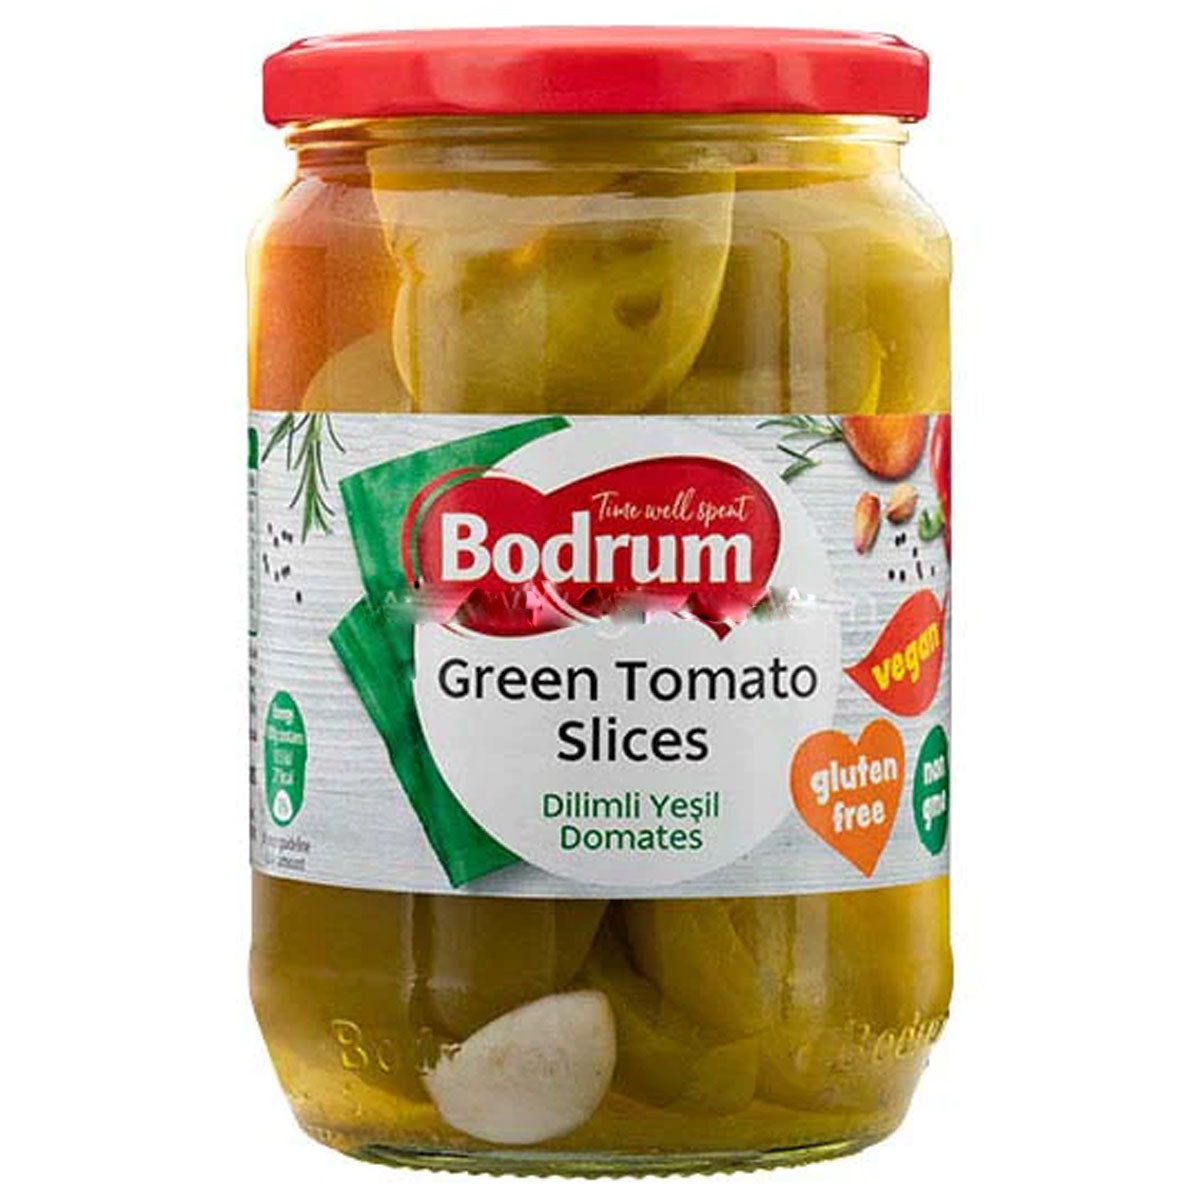 Bodrum - Green Tomato Slices - 670g - Continental Food Store